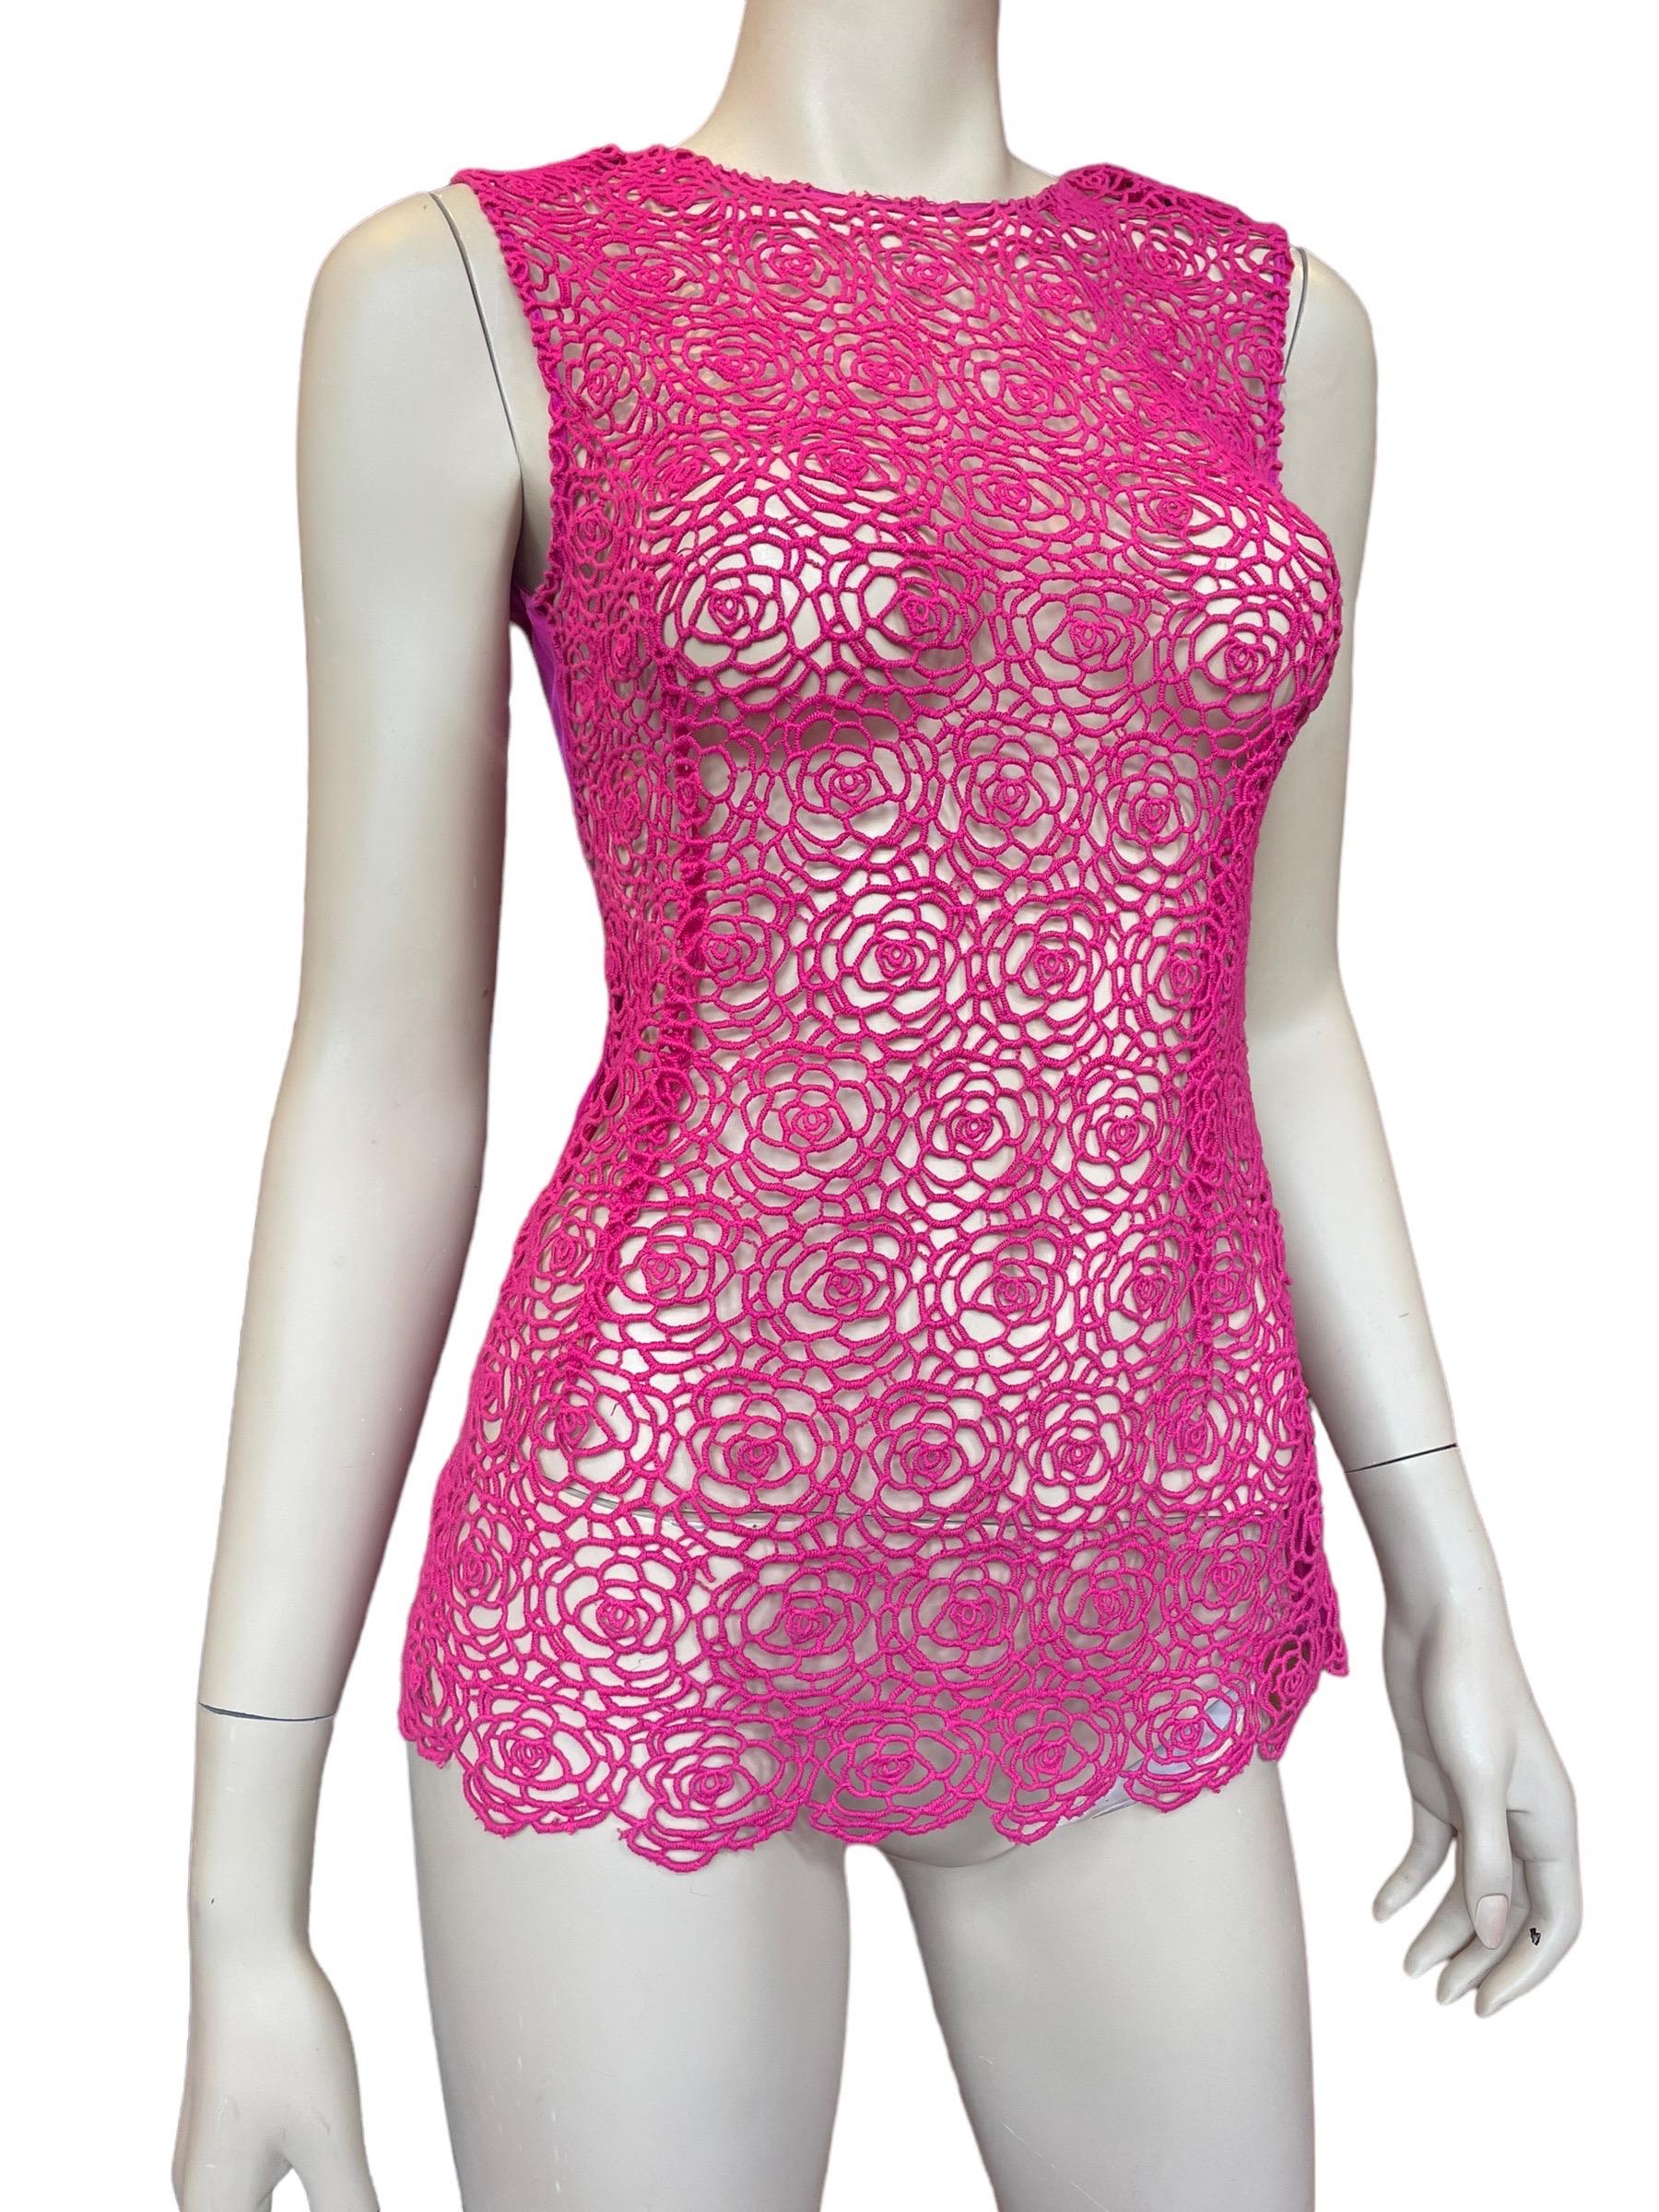 Magenta Oscar de la Renta Sleeveless Floral Blouse 

Adorable springtime vibe magenta sleeveless Oscar de la Renta floral sheer blouse. Could be paired with a bralette underneath for a sexy look, or worn with a plain camisole underneath. Zipper